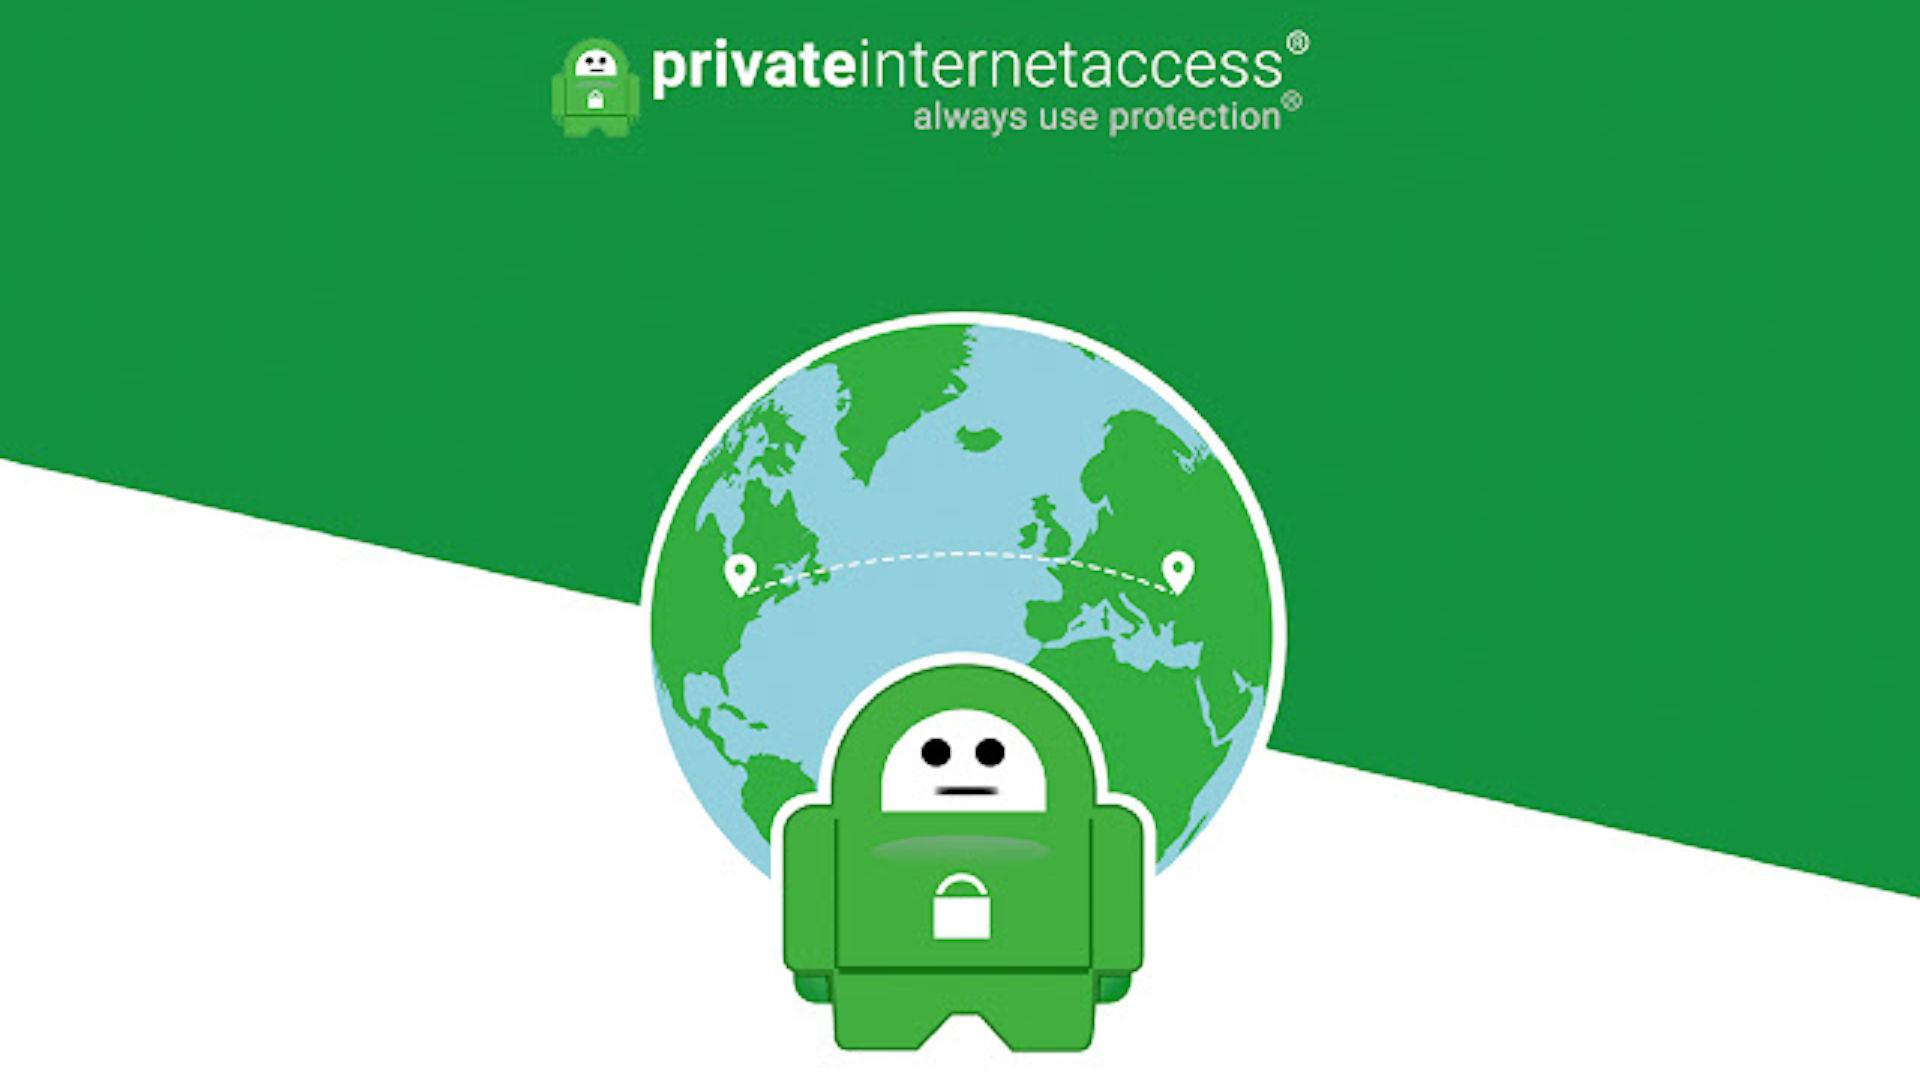 Best mobile VPNs, number 6: Private Internet Access. Image shows the business's logo.